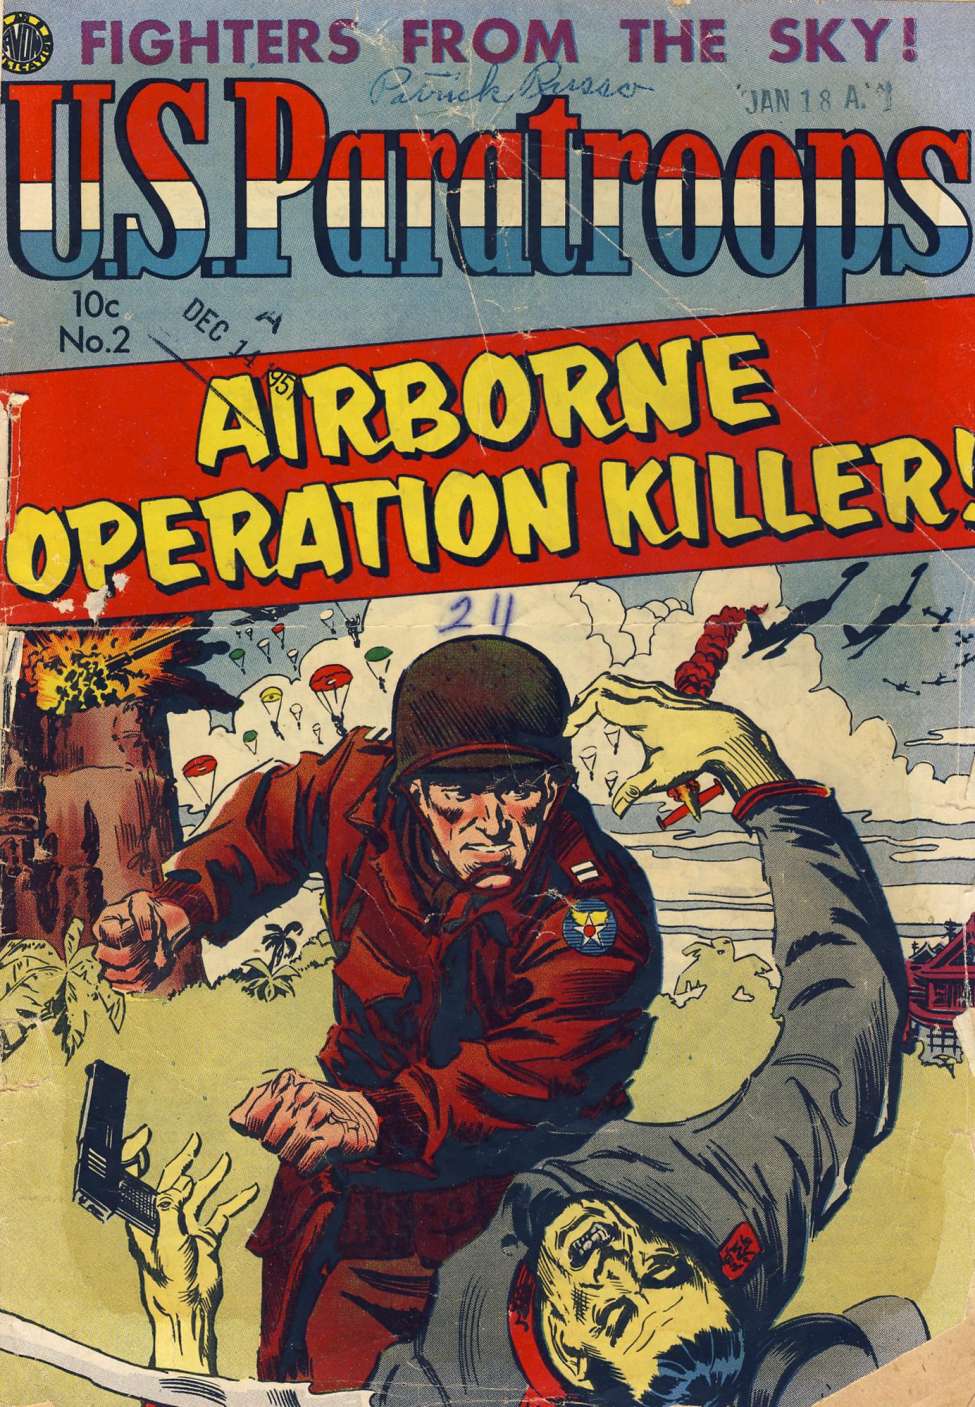 Book Cover For U.S. Paratroops 2